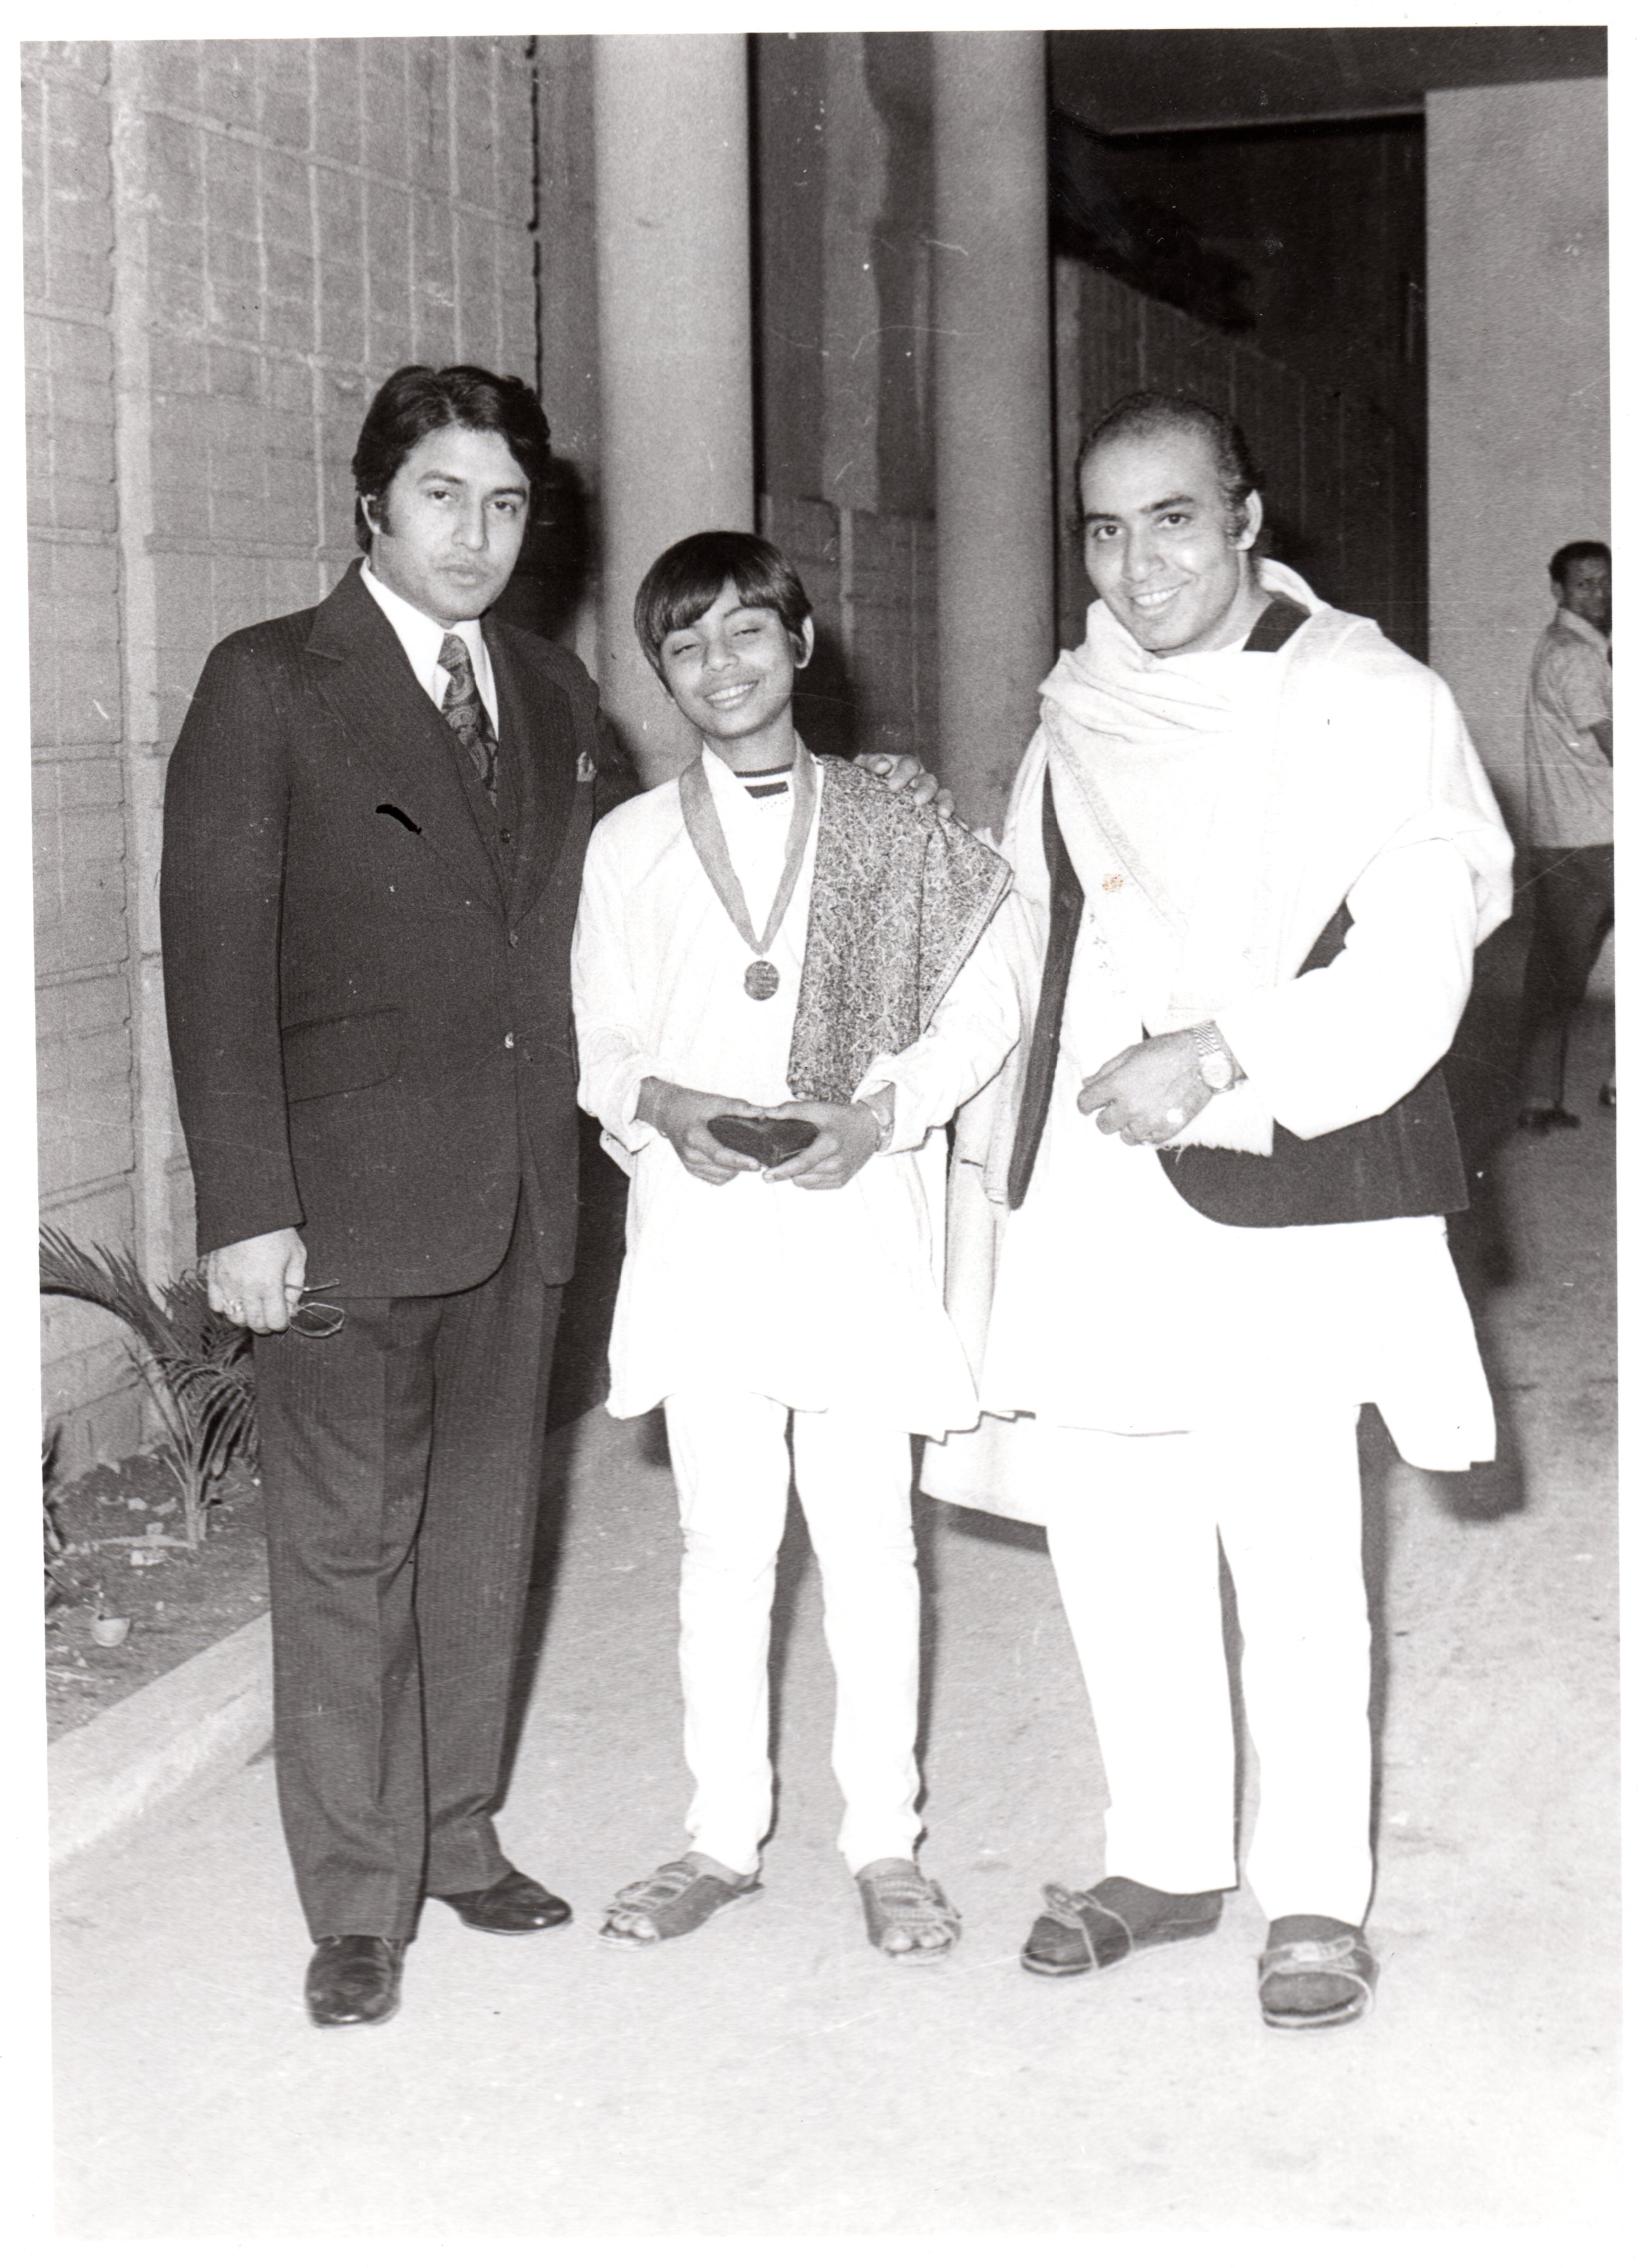 1973 with father receiving gold medal from Ustad Amjad Ali Khan